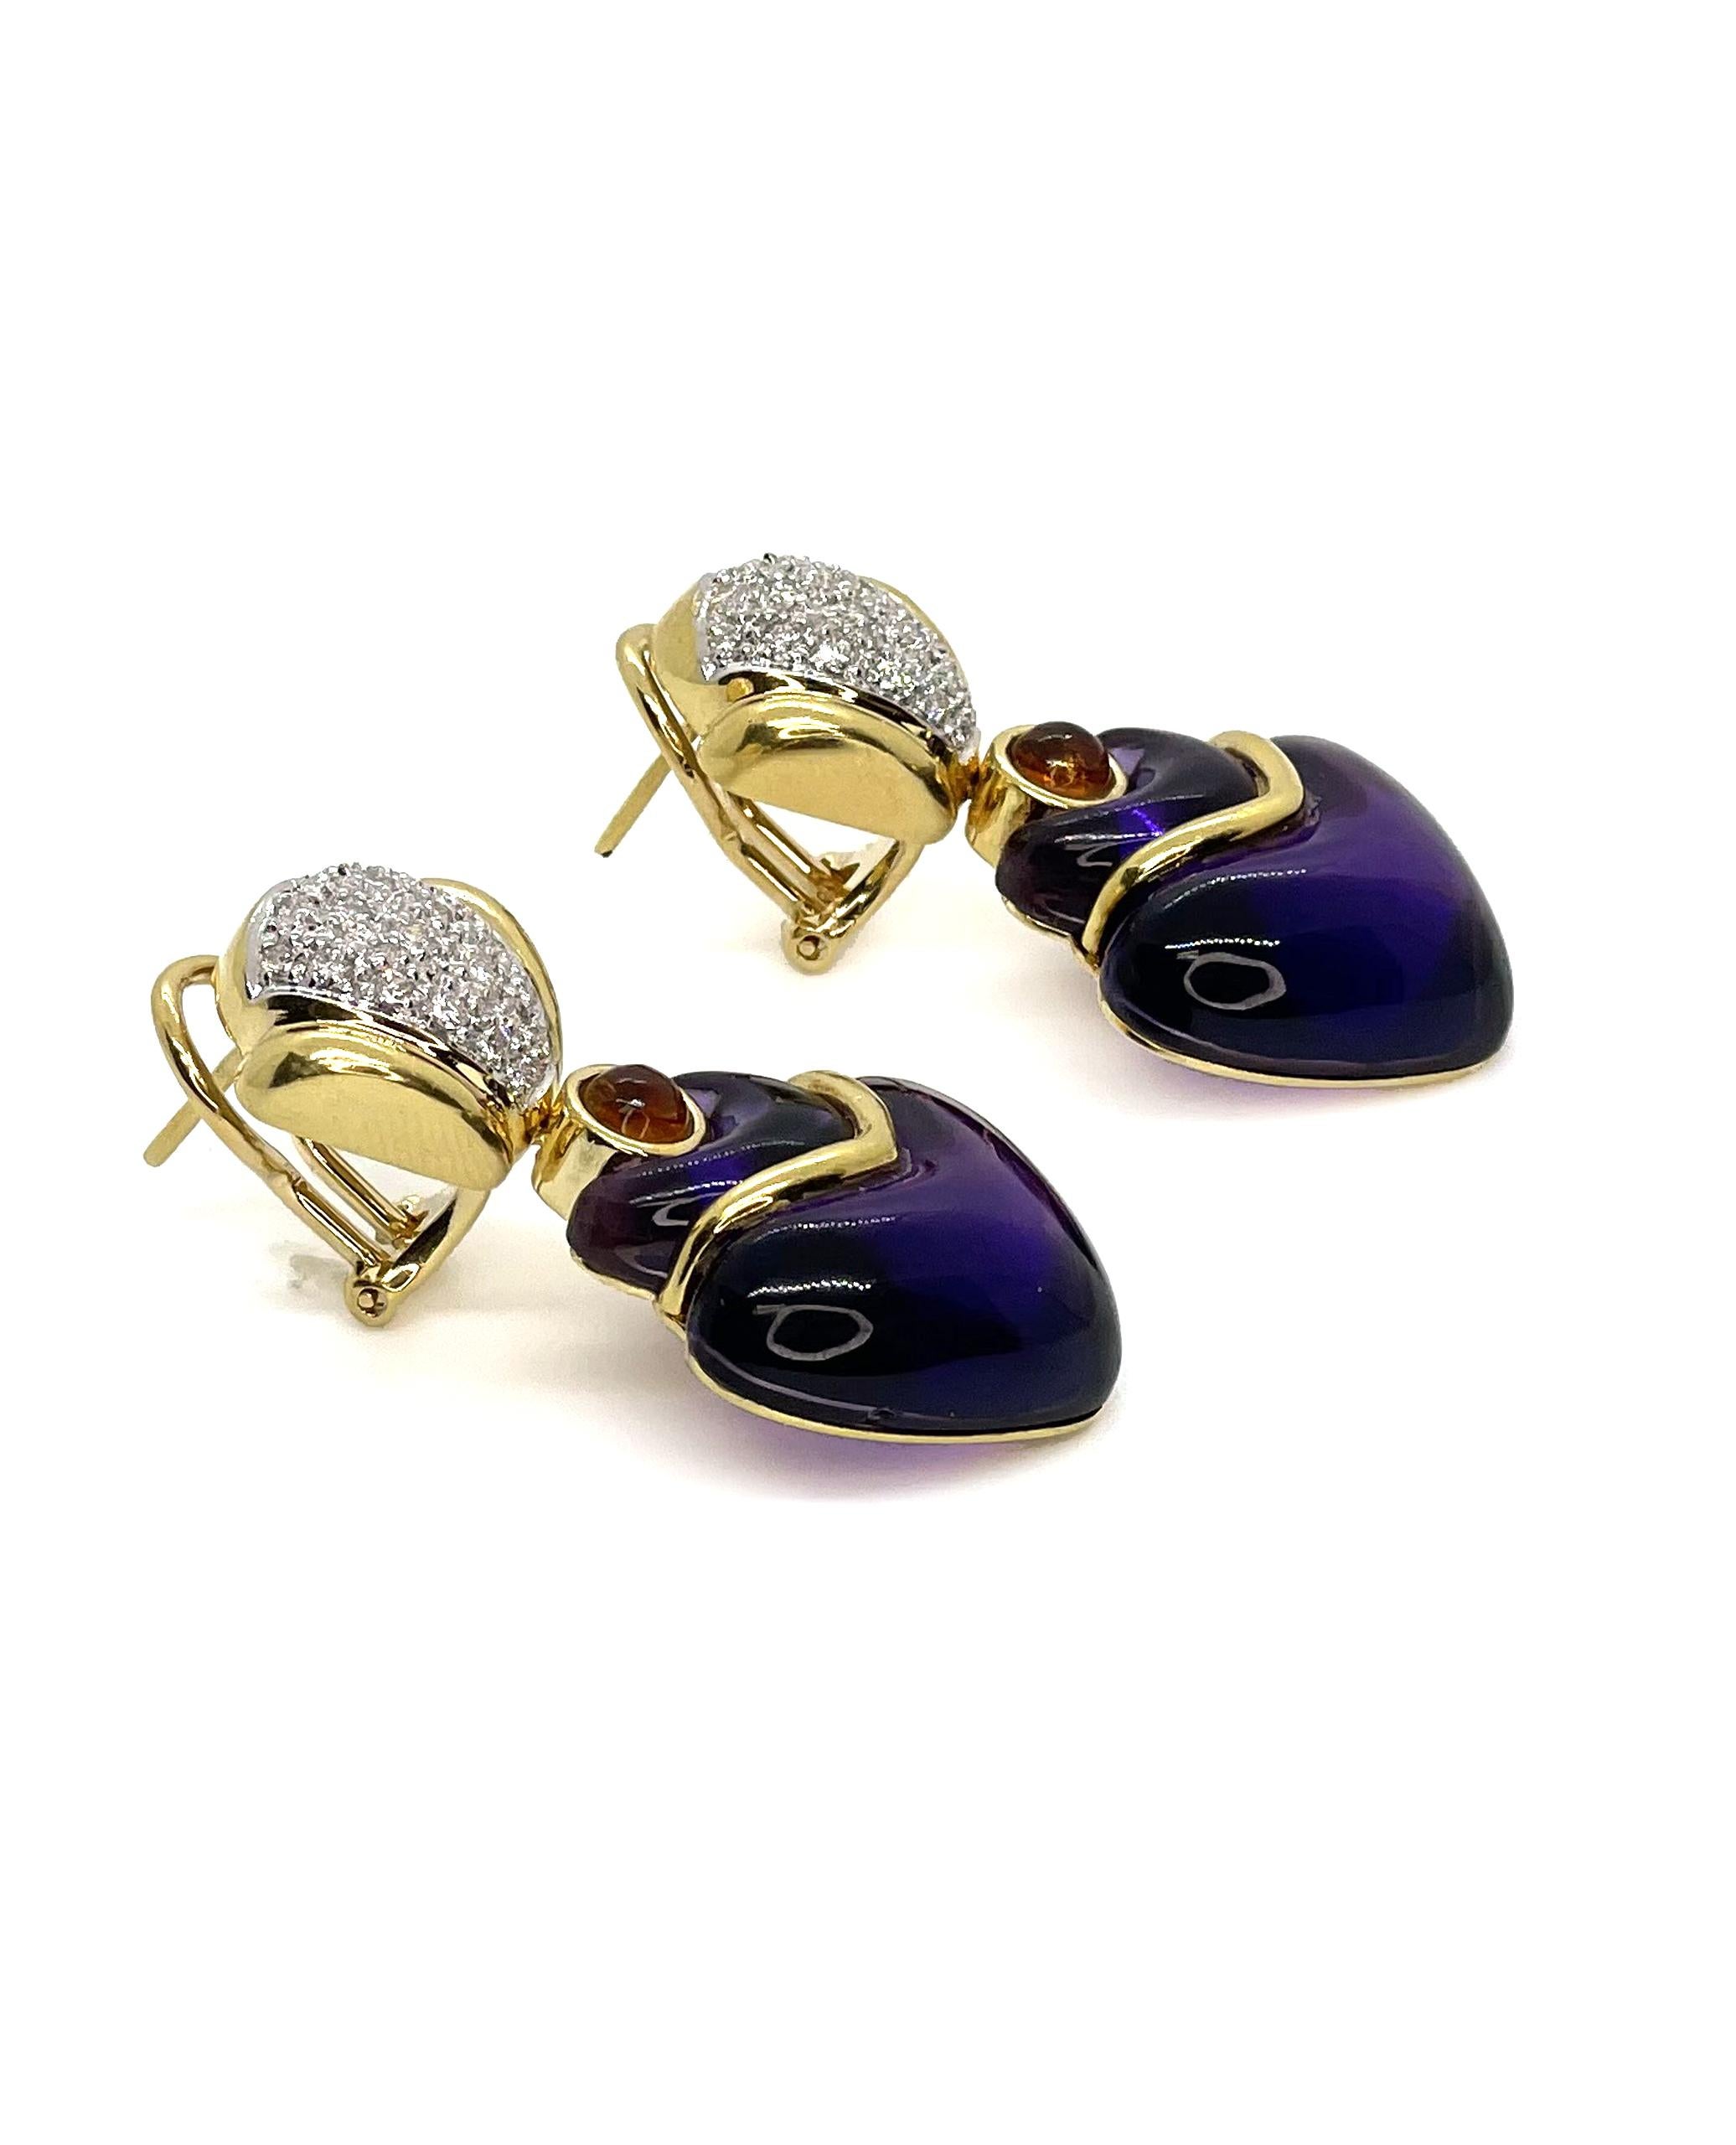 Pair of one of a kind 18K yellow gold earrings with two fancy cut heart cabochon amethysts, two round cabochon citrines and 40 round pave set diamonds 0.59 carat (G/H color, VS2/SI1 clarity).

-Amethysts are approximately 20.00x20.11mm